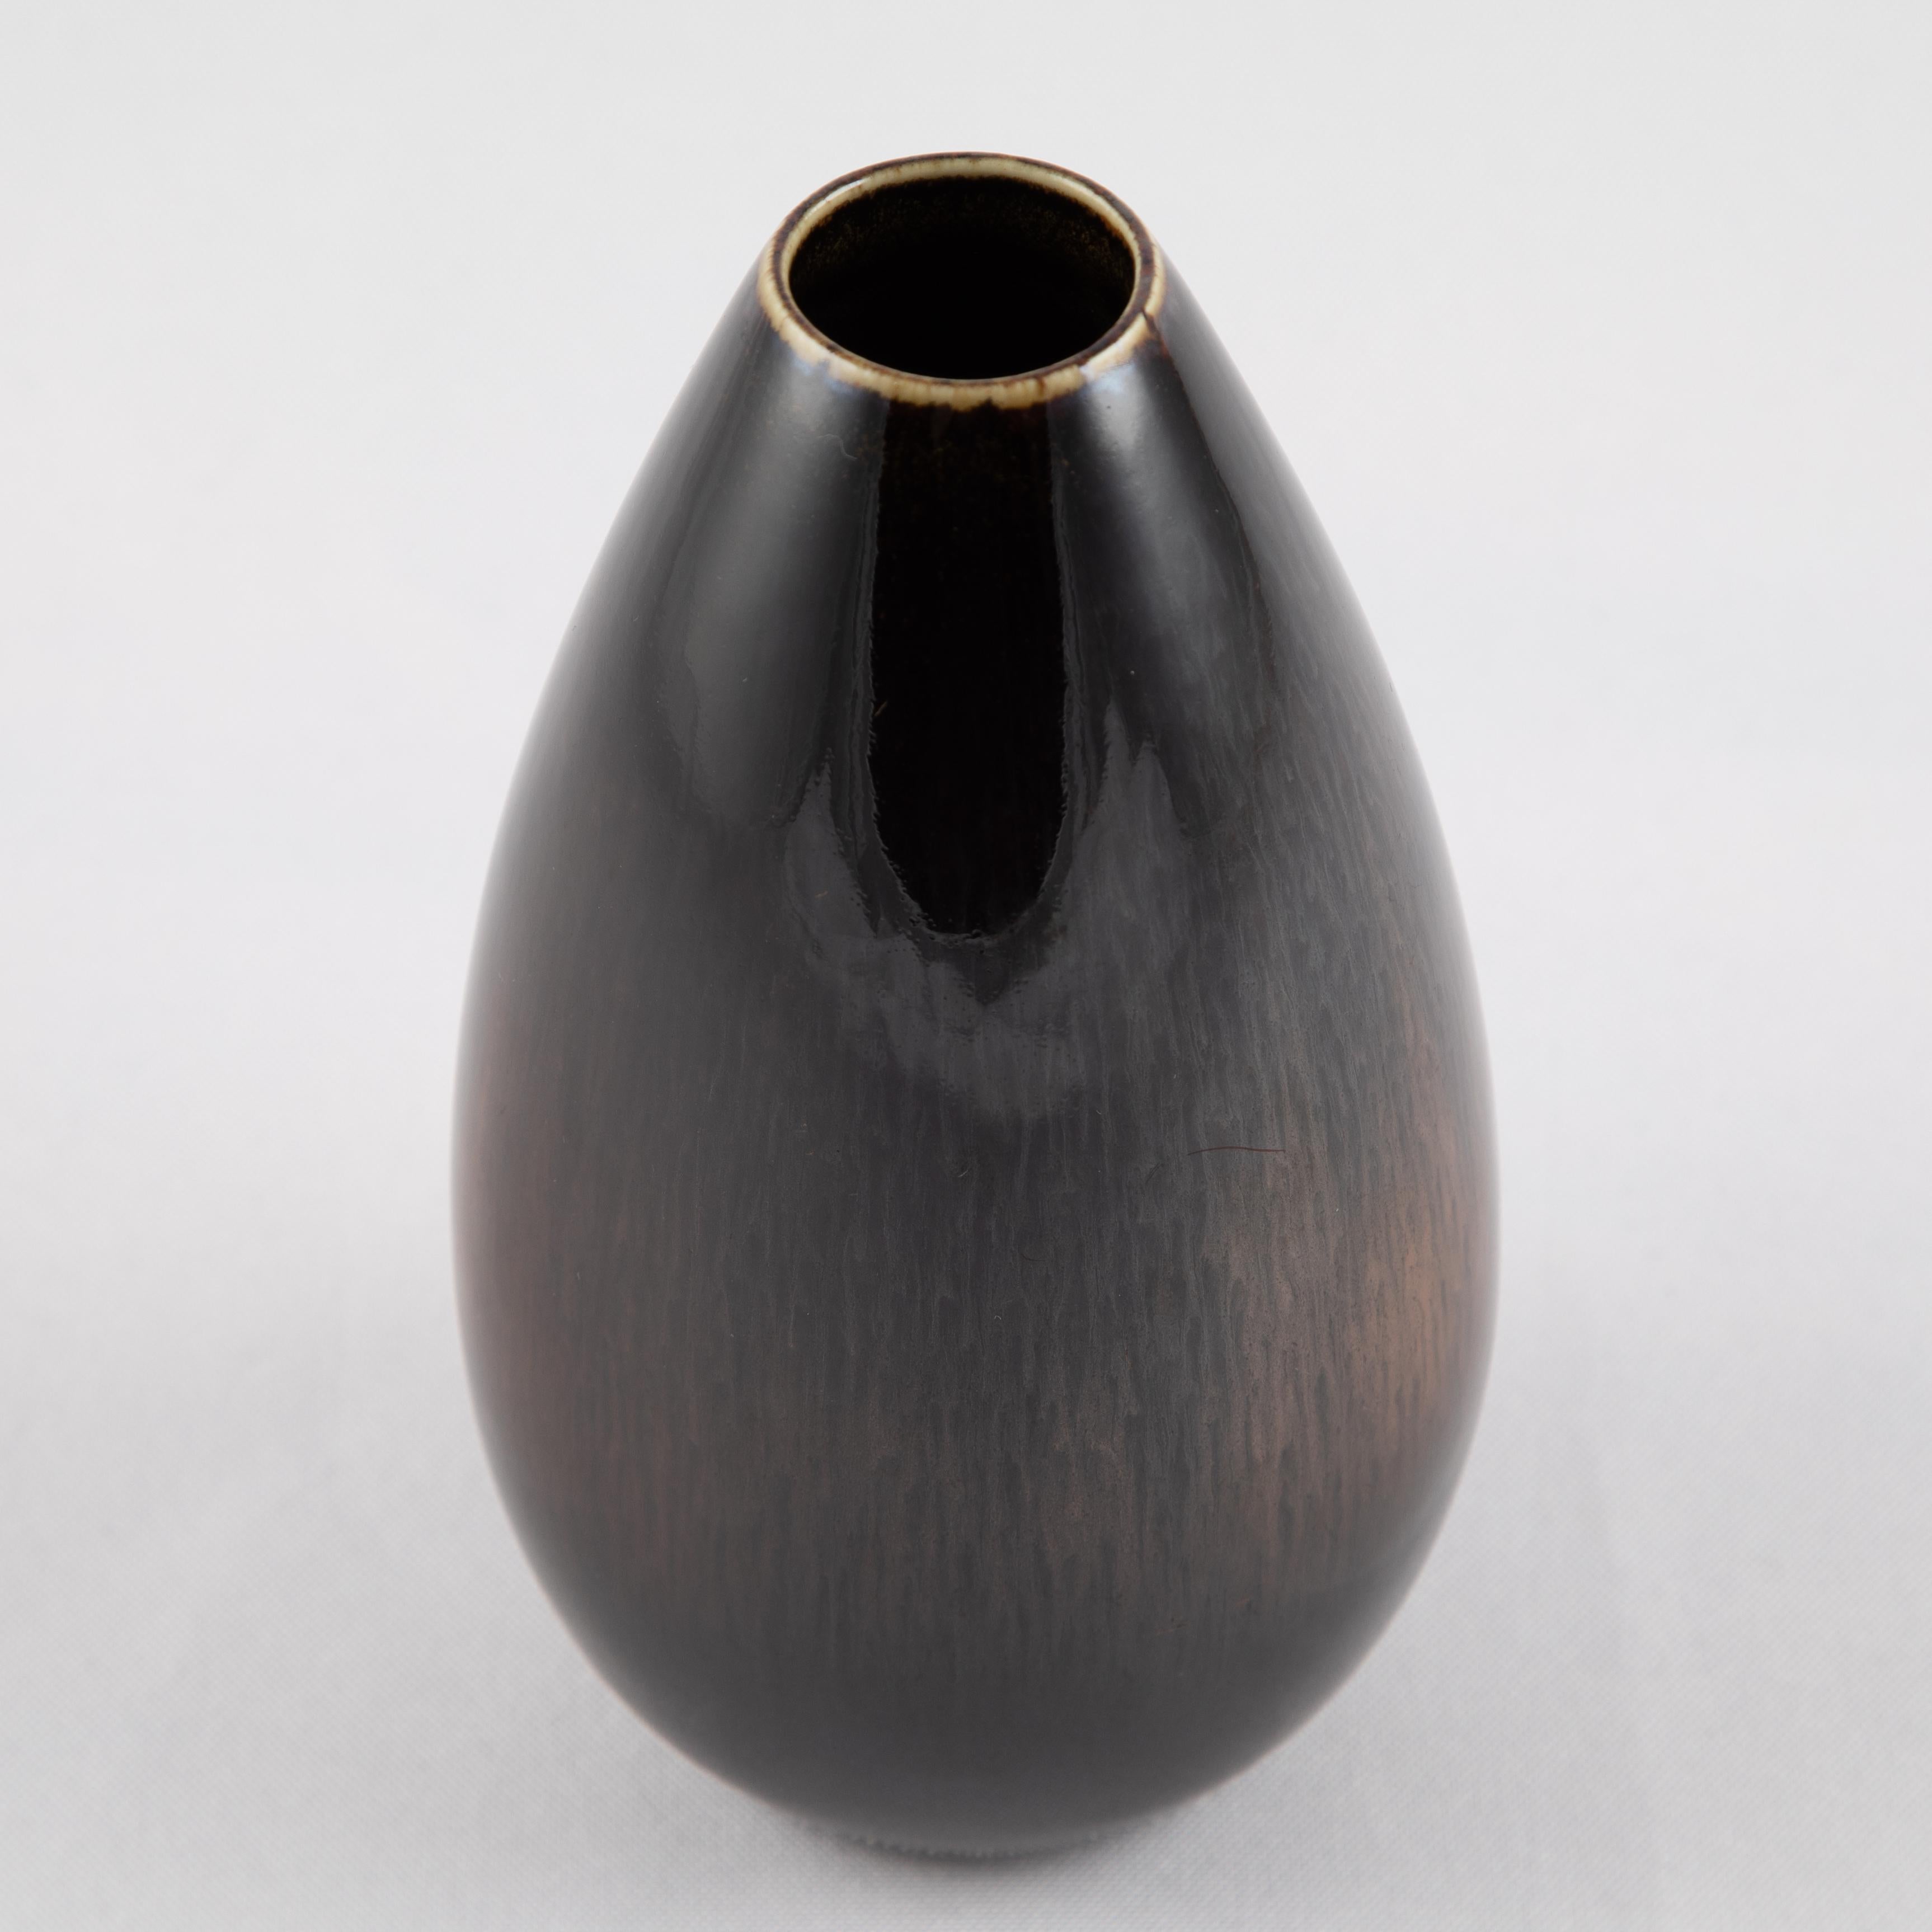 Elegant teardrop-form vase with rich brown glazes by Carl-Harry Stålhane for Rörstrand. Signed with the Rörstrand 